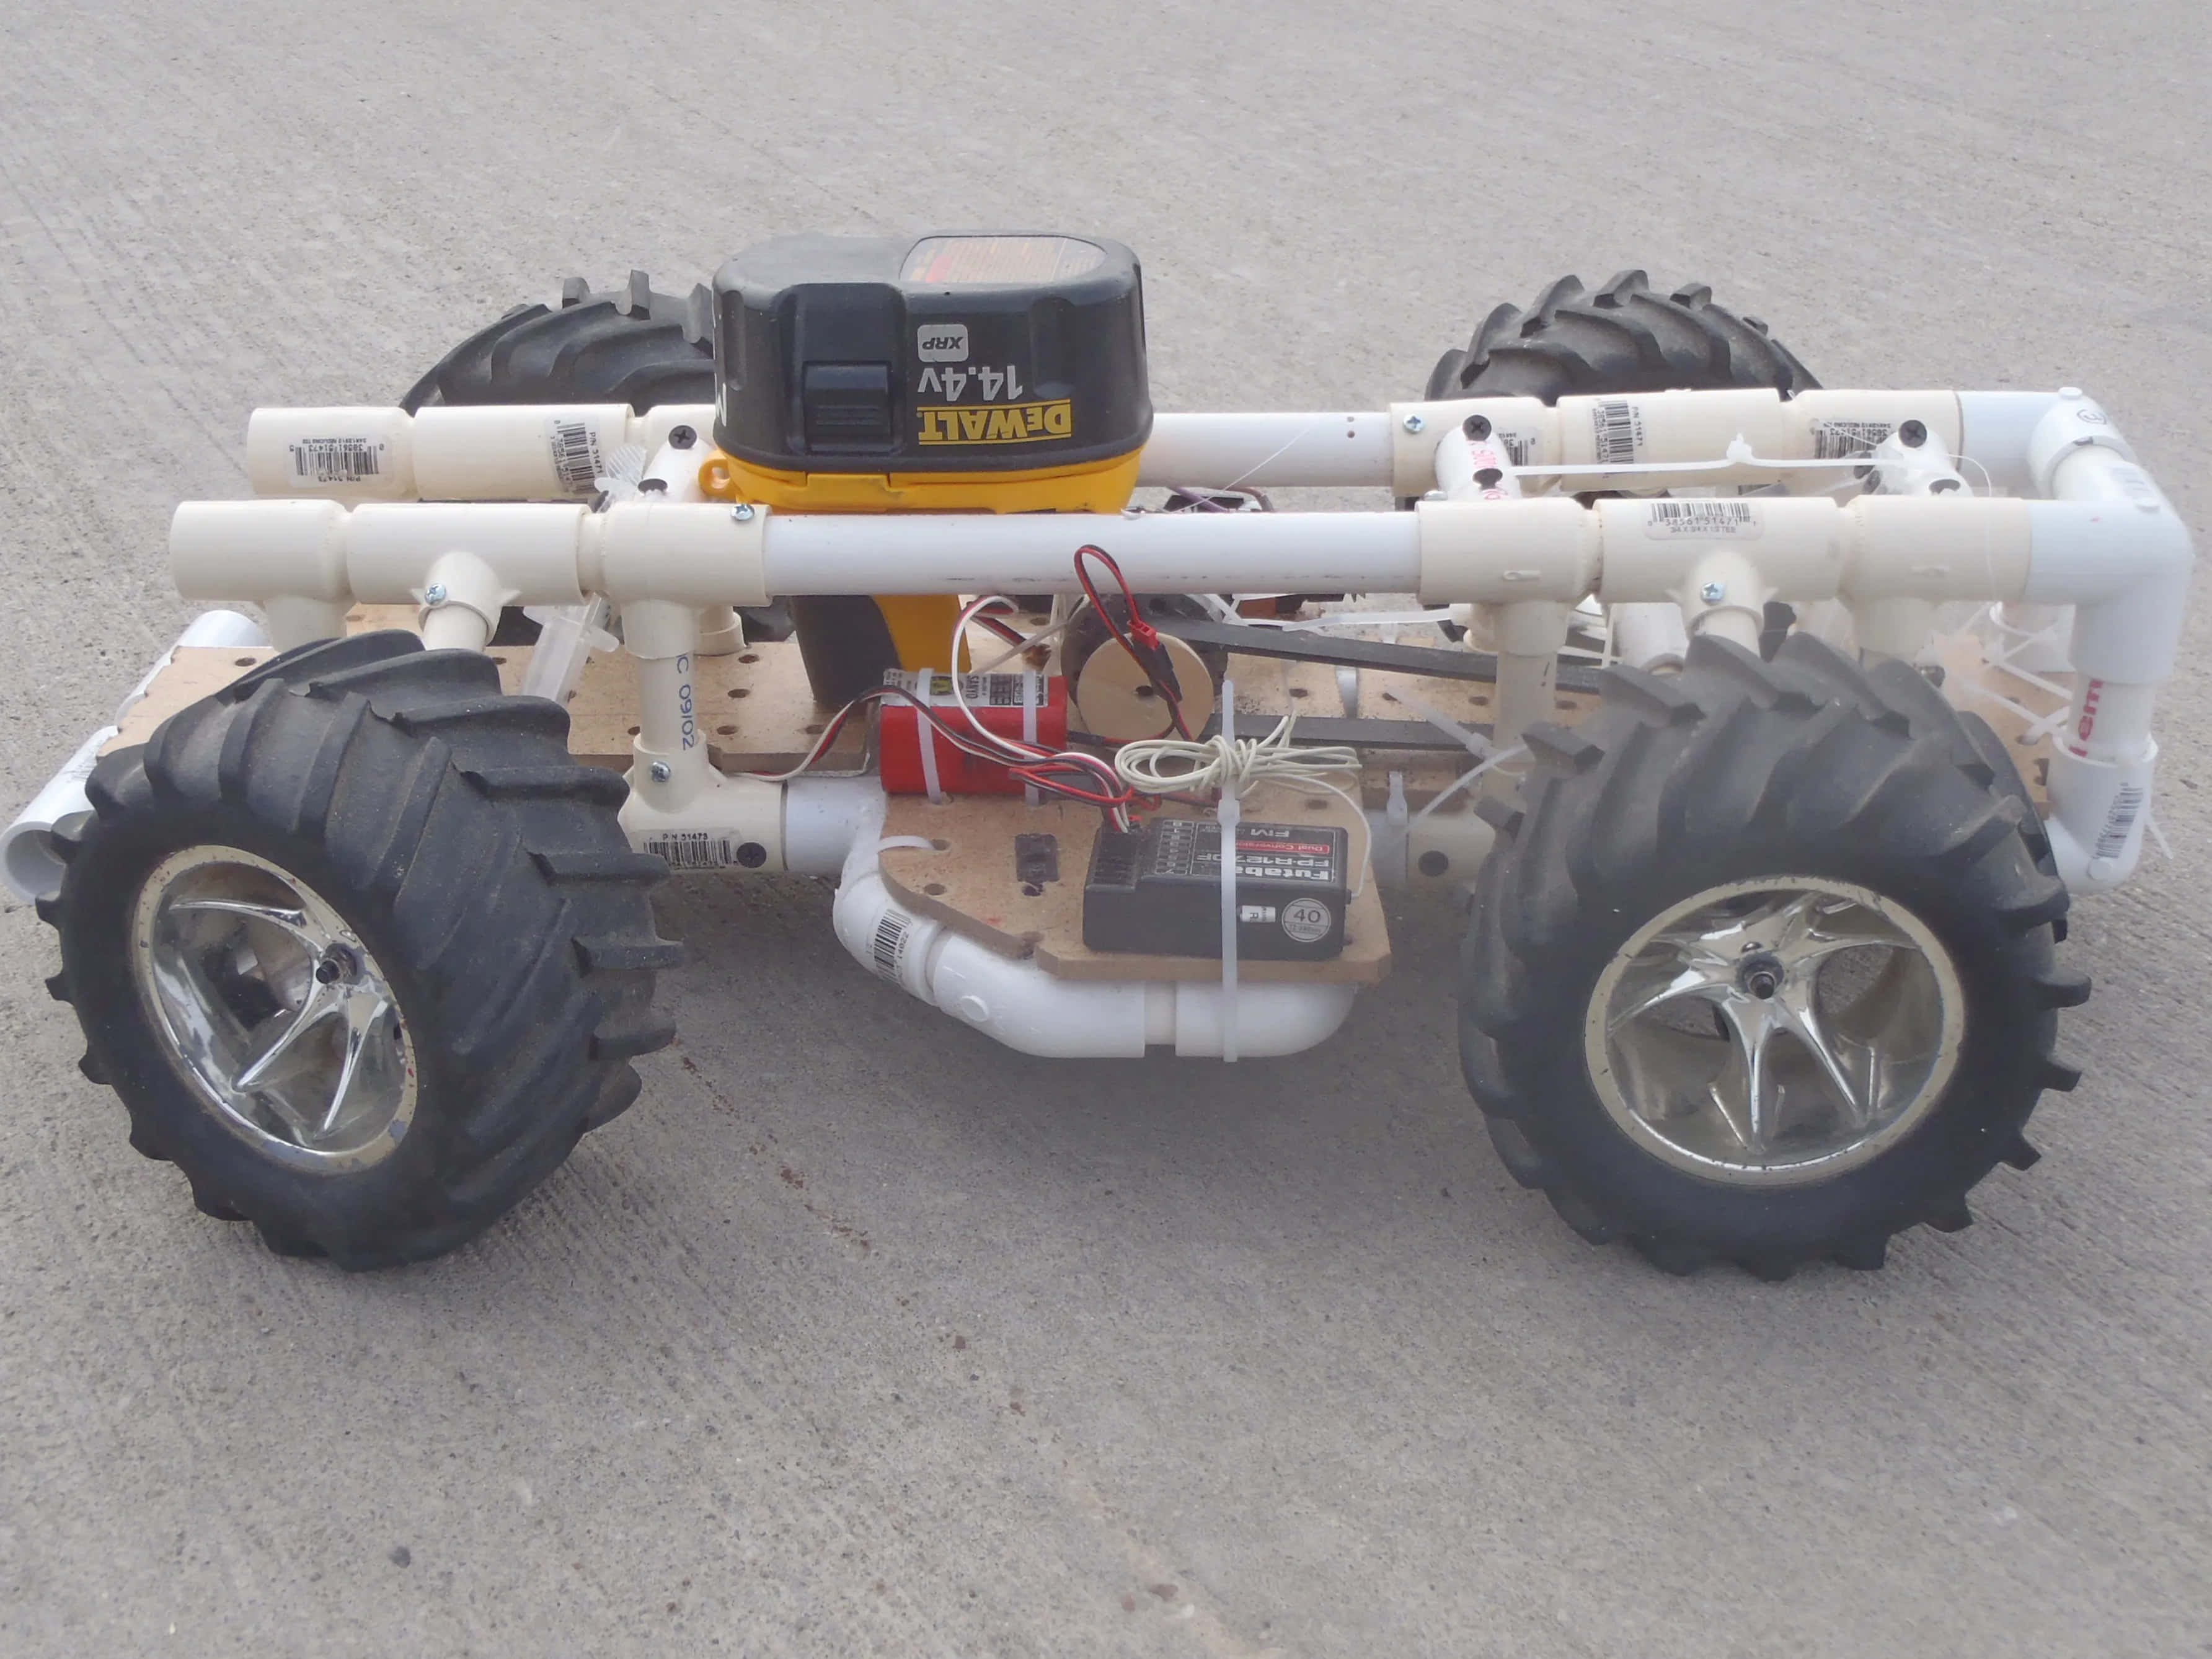 A Toy Vehicle With A Large Engine And Wheels